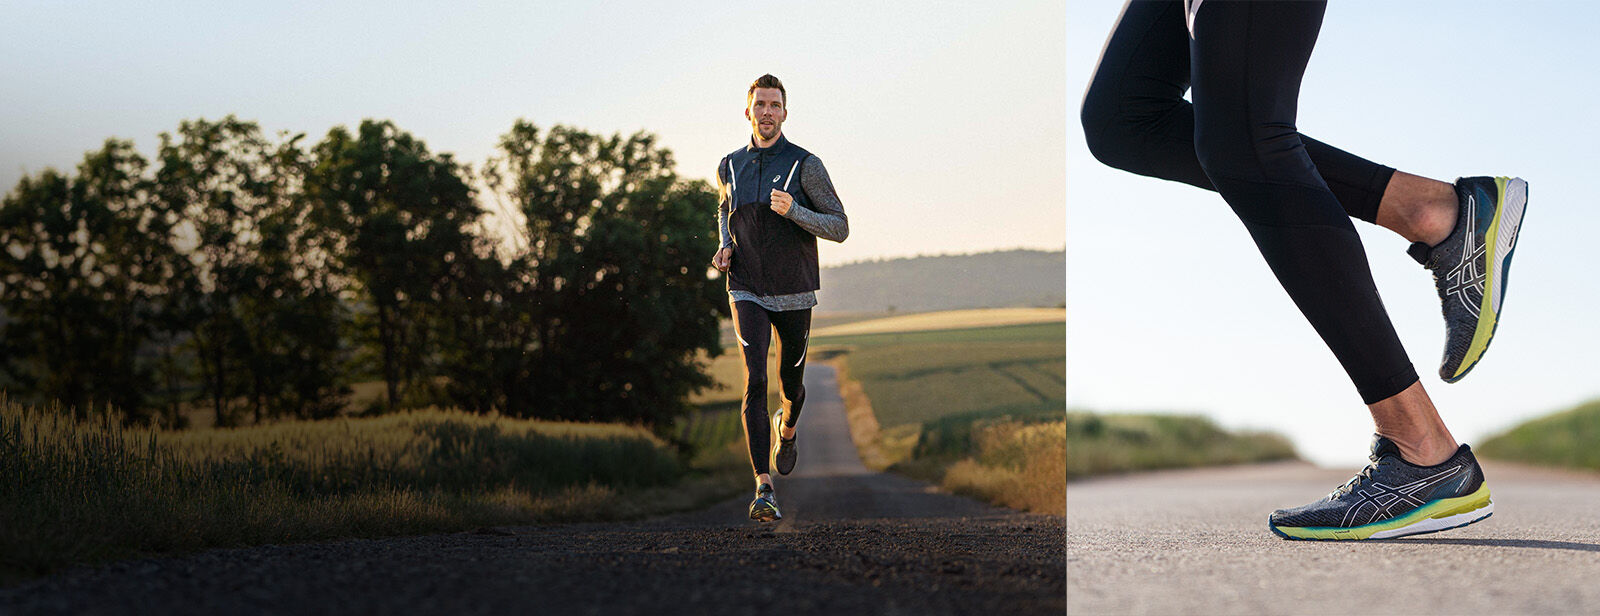 ASICS The Netherlands | Official Running Shoes & Clothing | ASICS